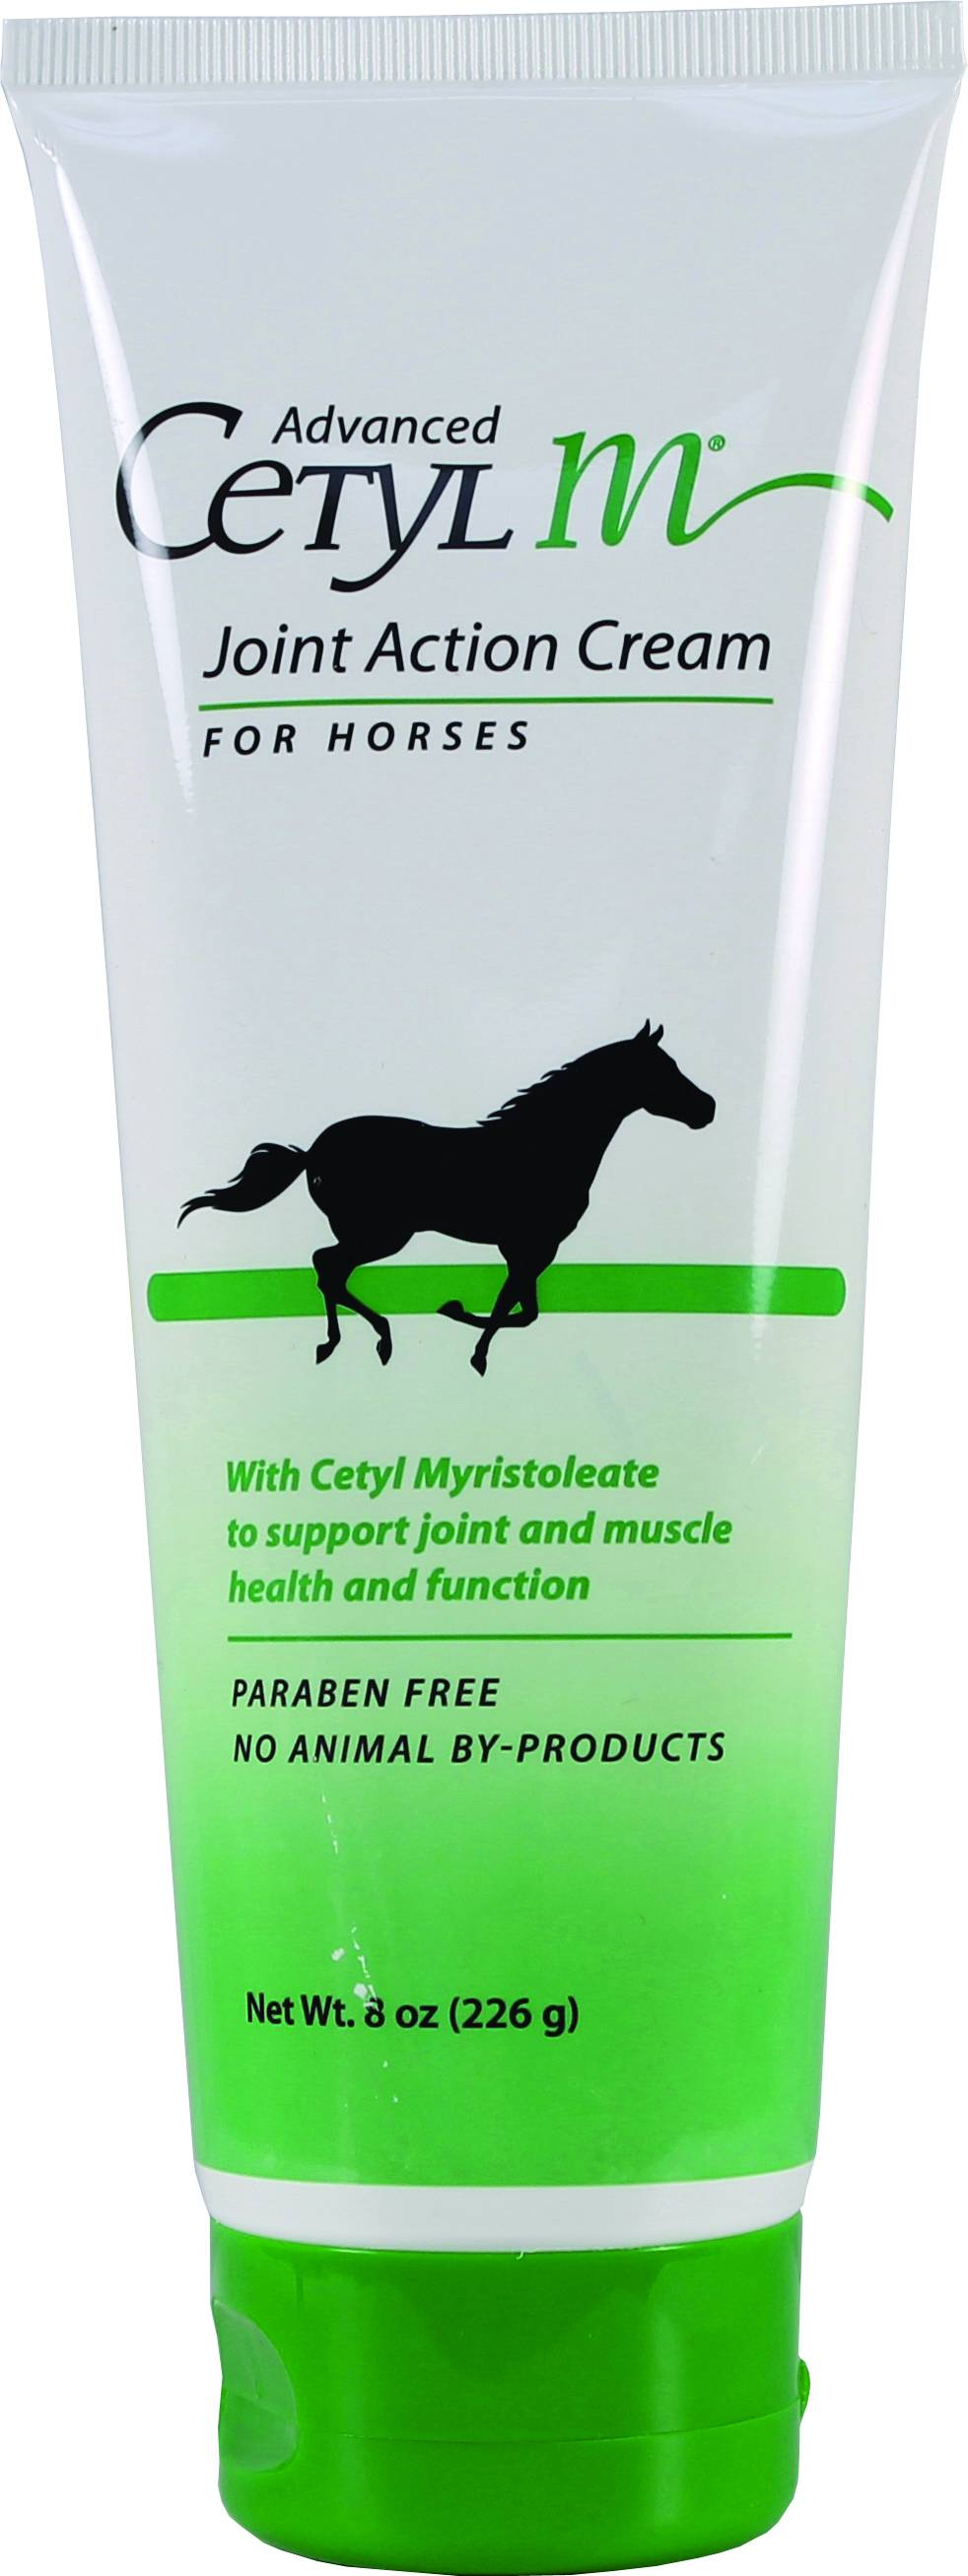 Advanced Cetyl M Joint Action Cream For Horses